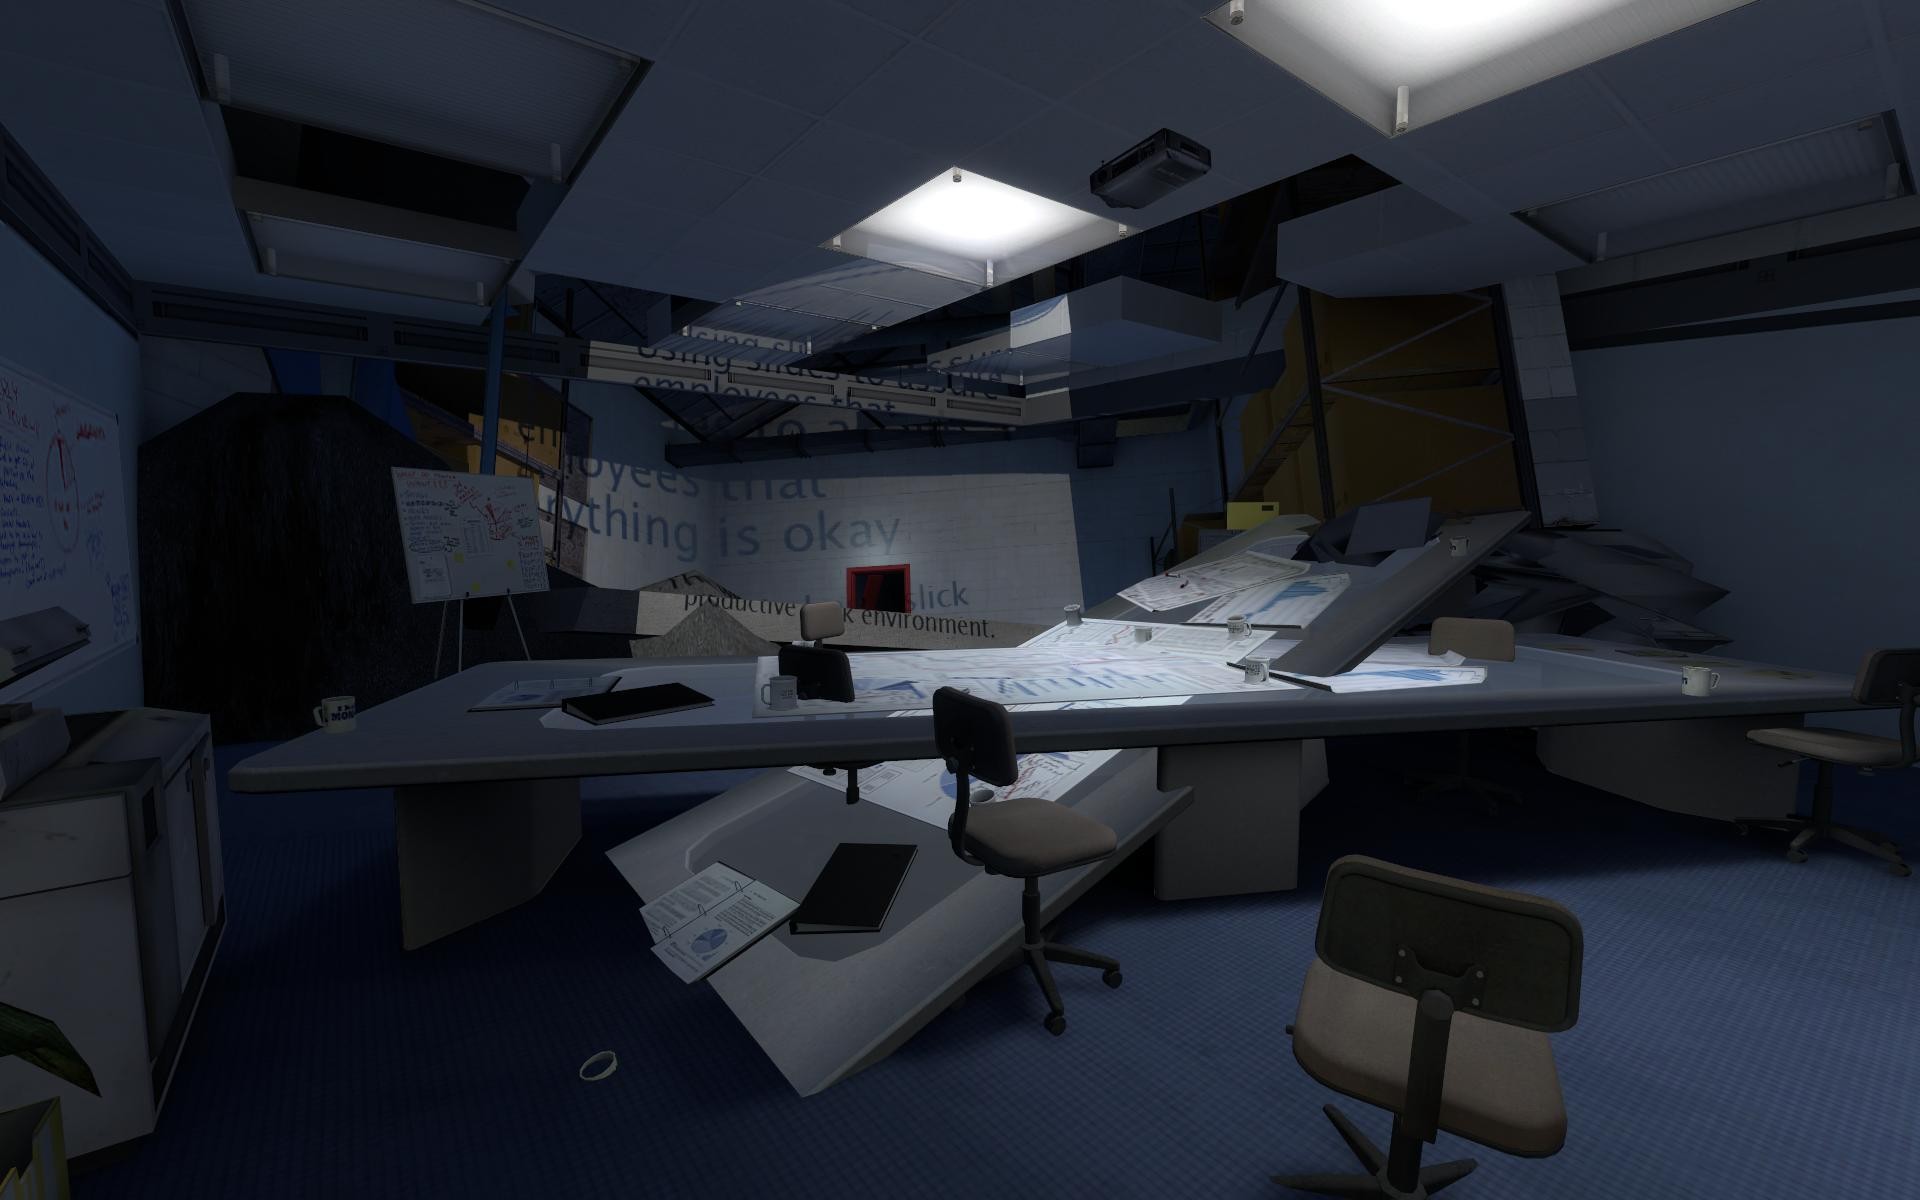 Stanley parable ultra. Офис Стэнли the Stanley Parable. The Stanley Parable офис 427. Коллекционки the Stanley Parable PS. Stanley Parable Deluxe Edition.